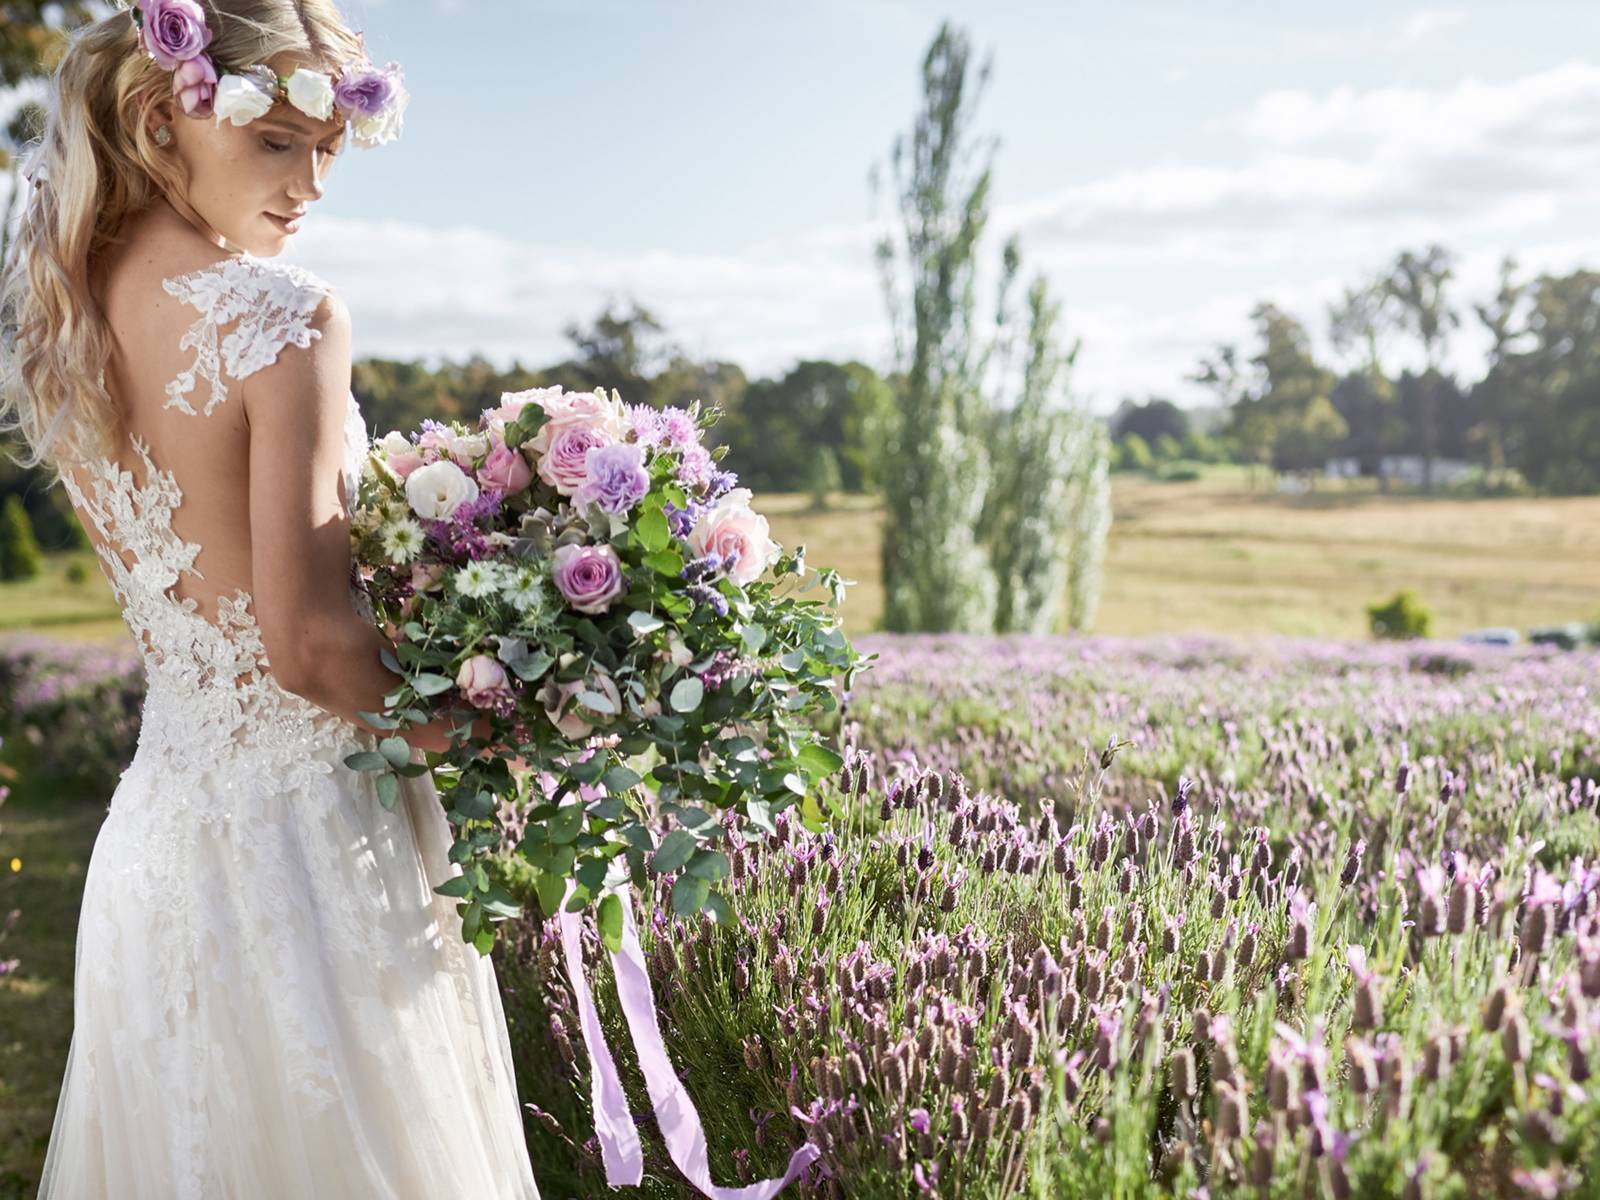 Bride holding large lavender and pink bouquet, standing in a lavender field.